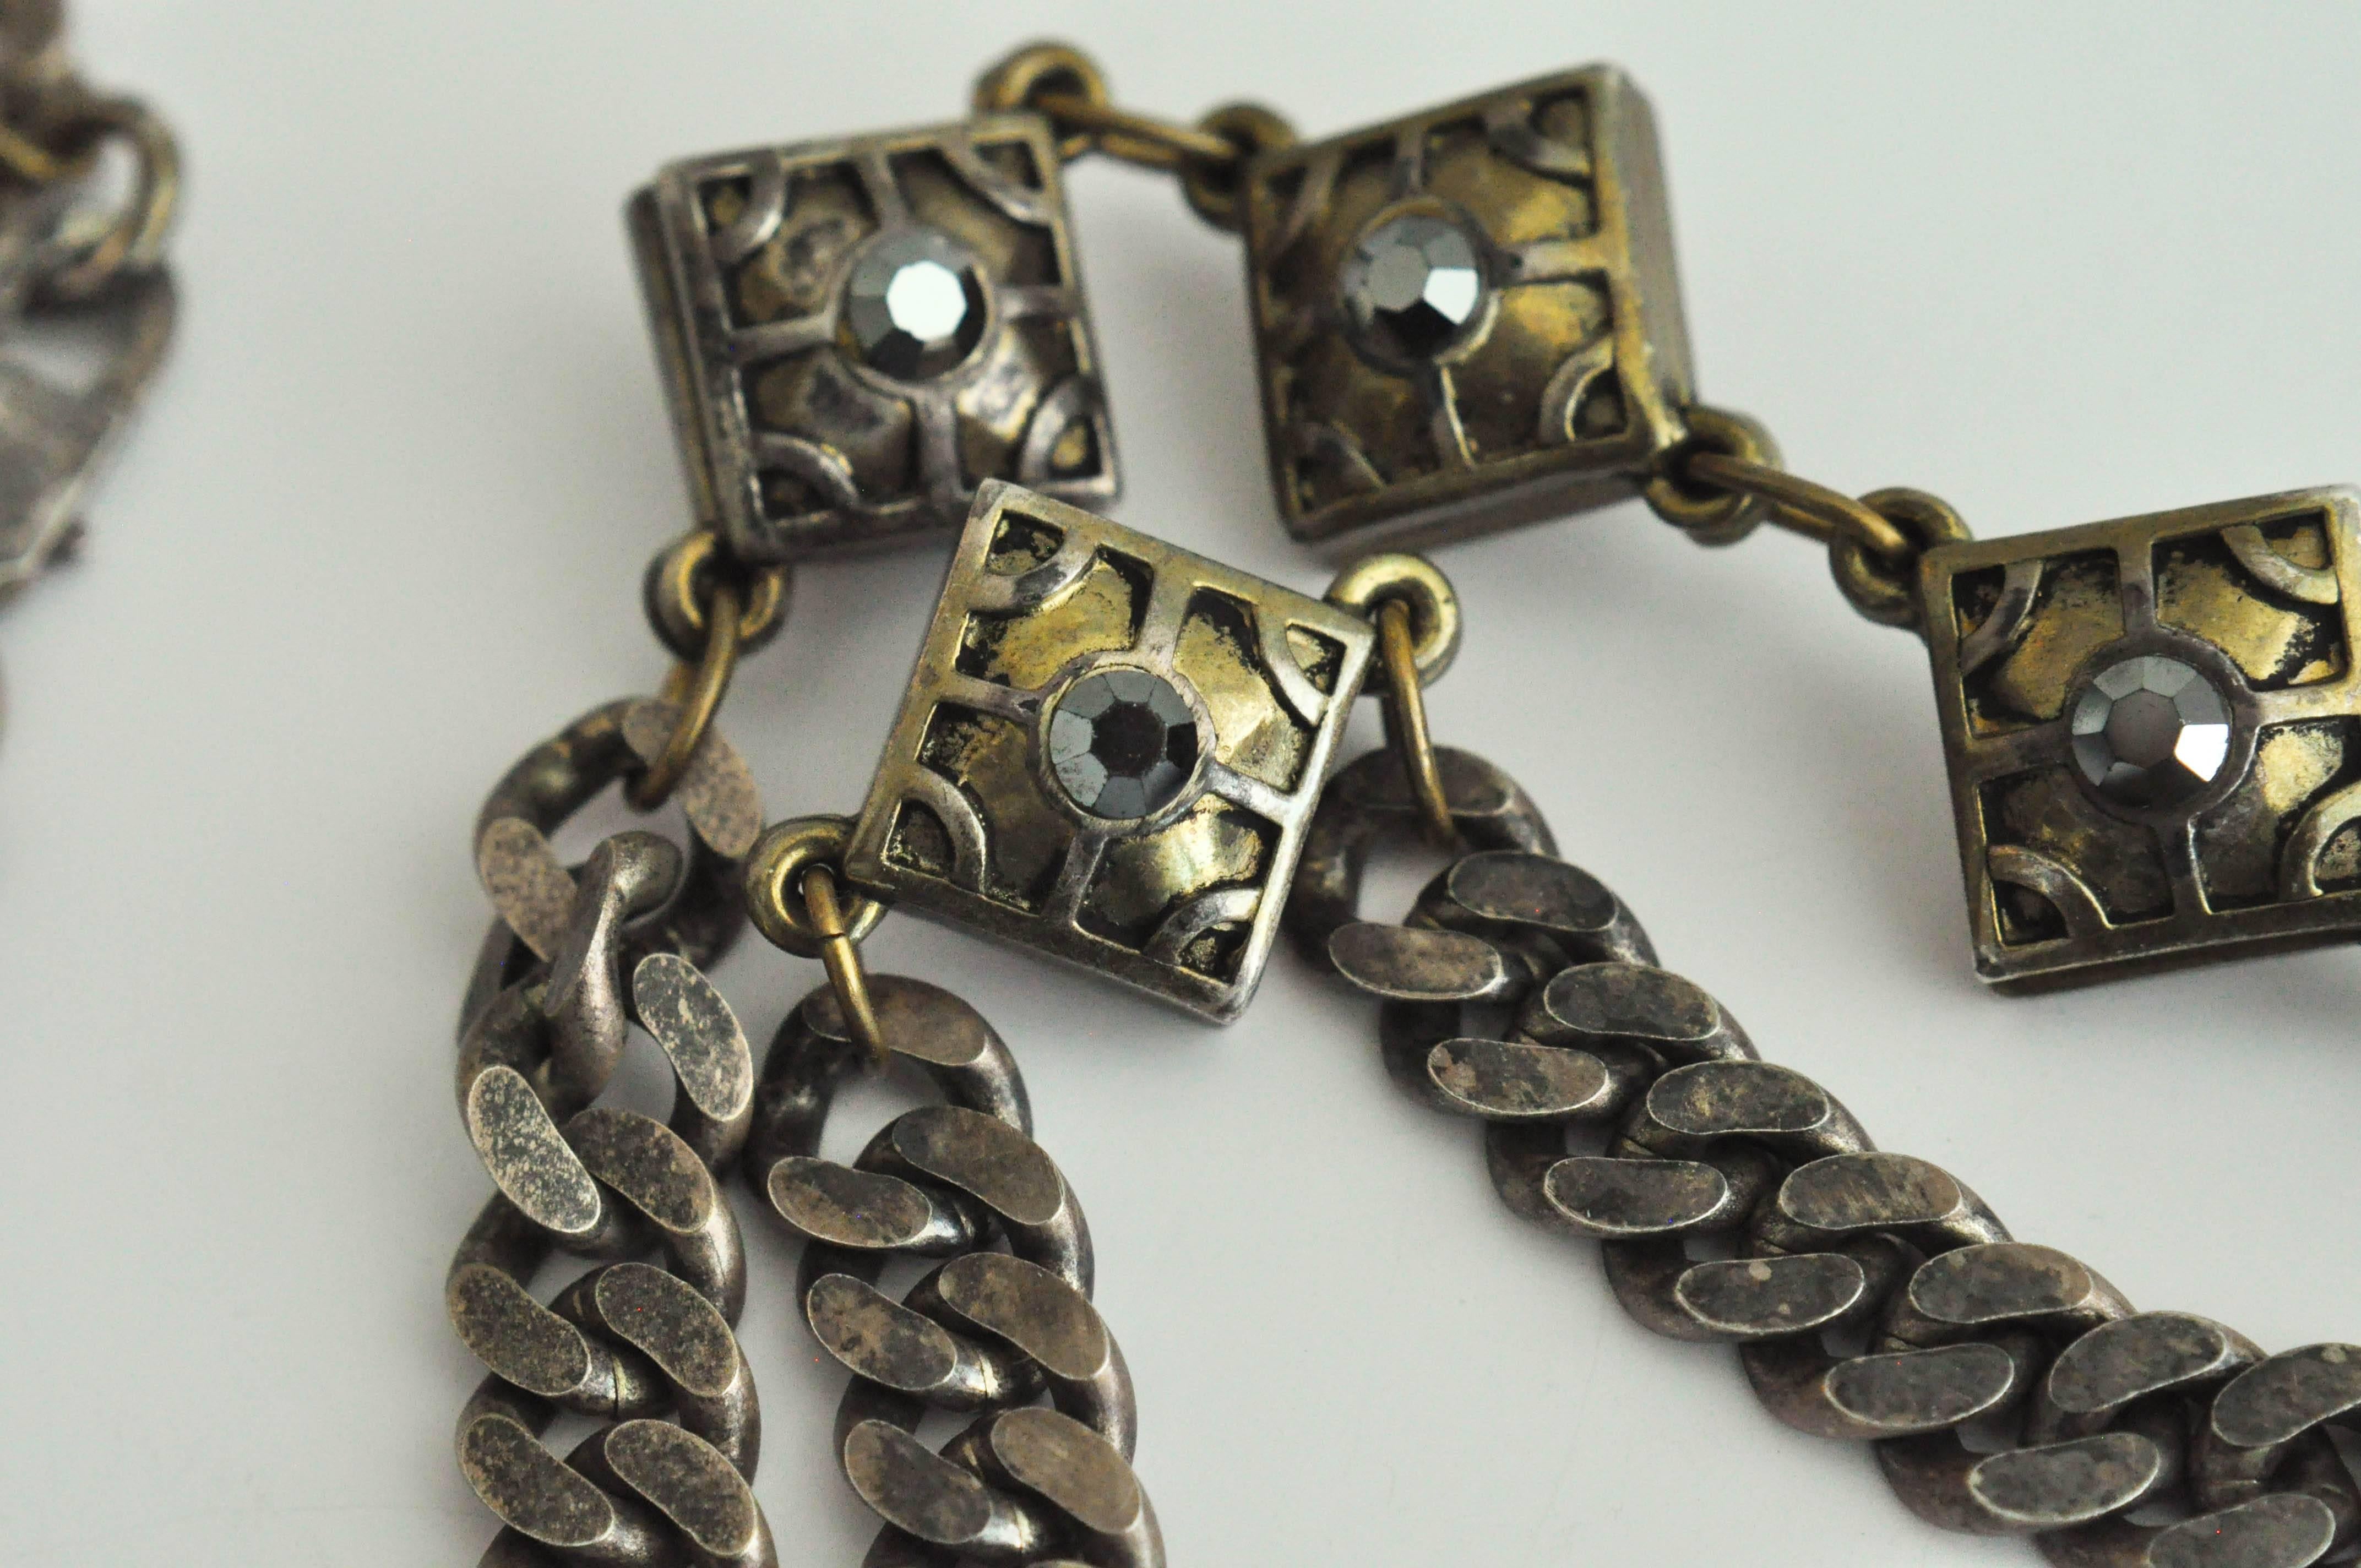  Jean Paul Gaultier Chain Necklace w/Jeweled Medallions, 1990s  For Sale 1